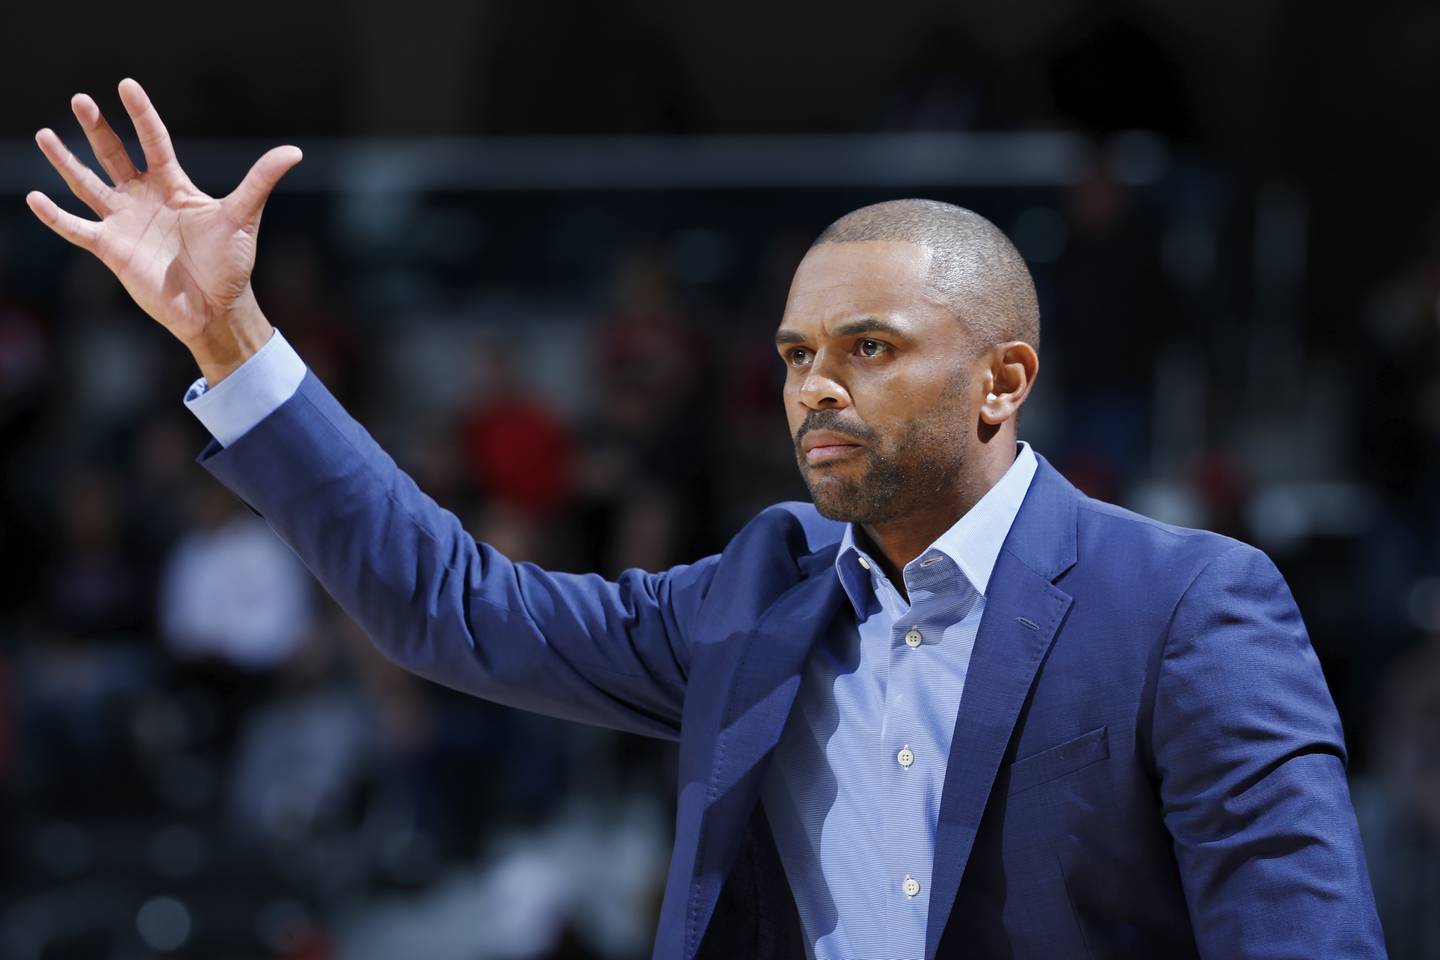 CINCINNATI, OH - NOVEMBER 16: Head coach Juan Dixon of the Coppin State Eagles reacts in the first half of a game against the Cincinnati Bearcats at BB&T Arena on November 16, 2017 in Highland Heights, Kentucky.